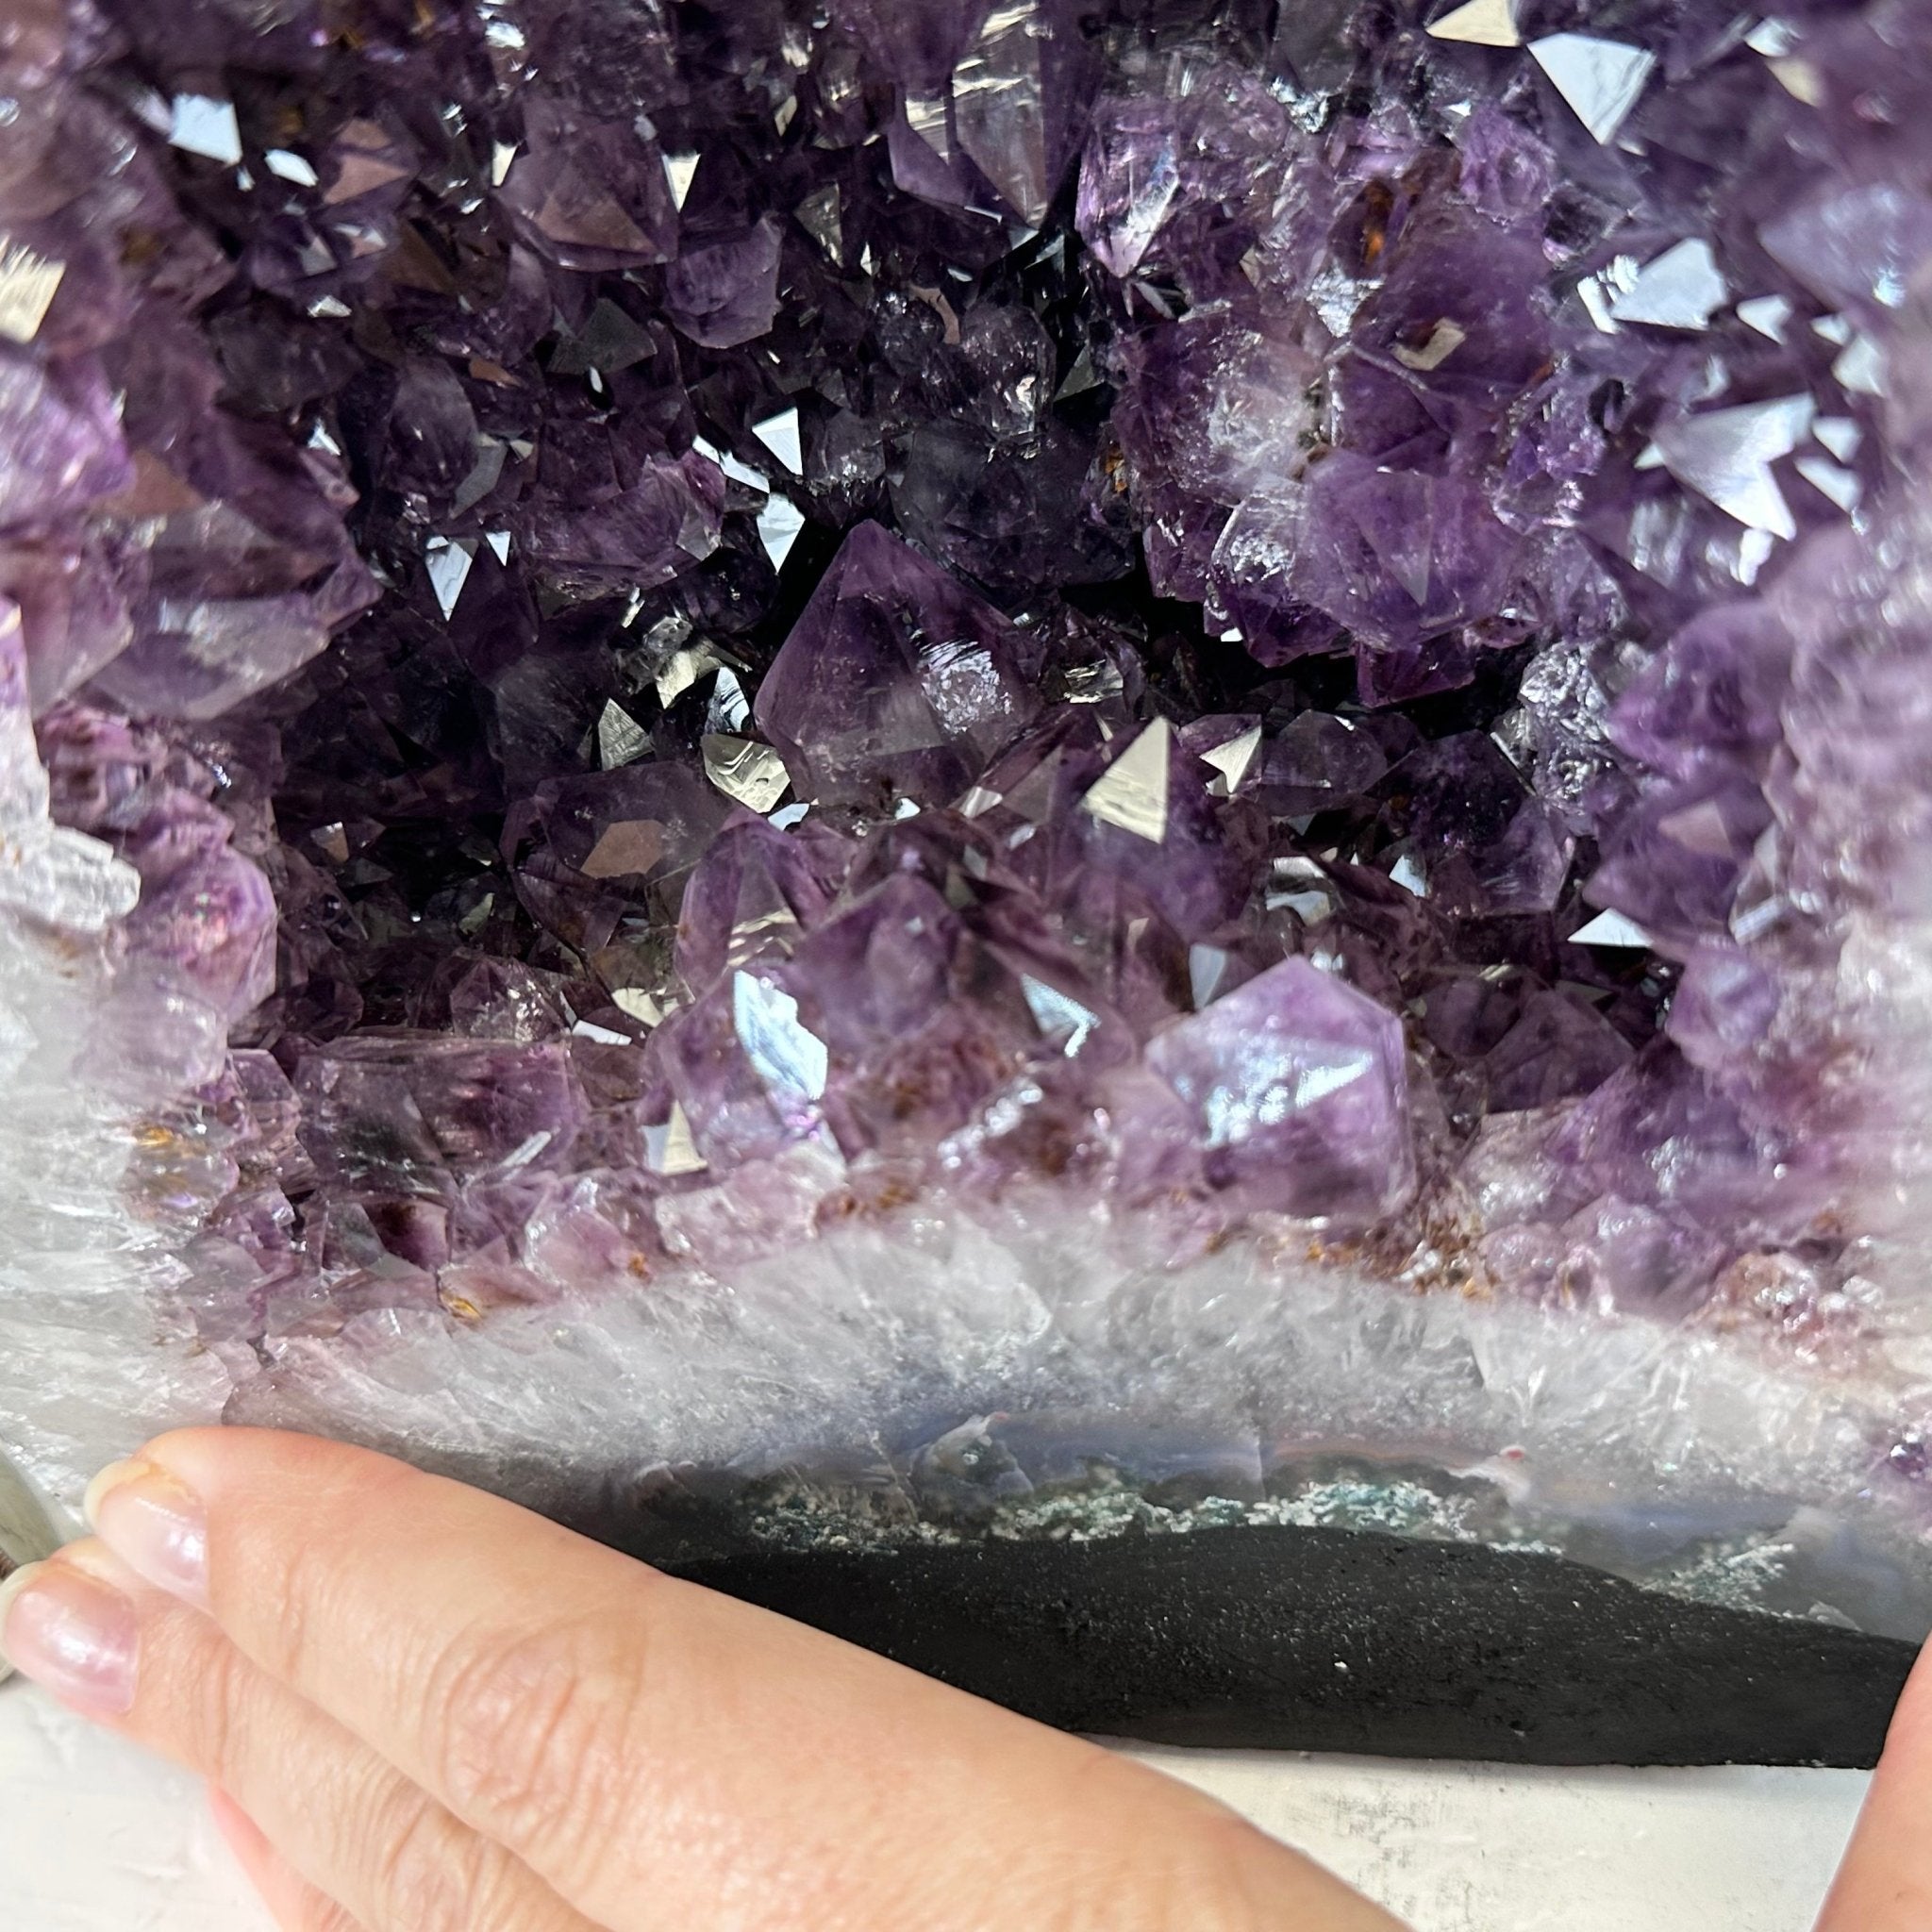 Extra Plus Quality Brazilian Amethyst Cathedral, 16 lbs & 11.8" Tall, Model #5601-0969 by Brazil Gems - Brazil GemsBrazil GemsExtra Plus Quality Brazilian Amethyst Cathedral, 16 lbs & 11.8" Tall, Model #5601-0969 by Brazil GemsCathedrals5601-0969